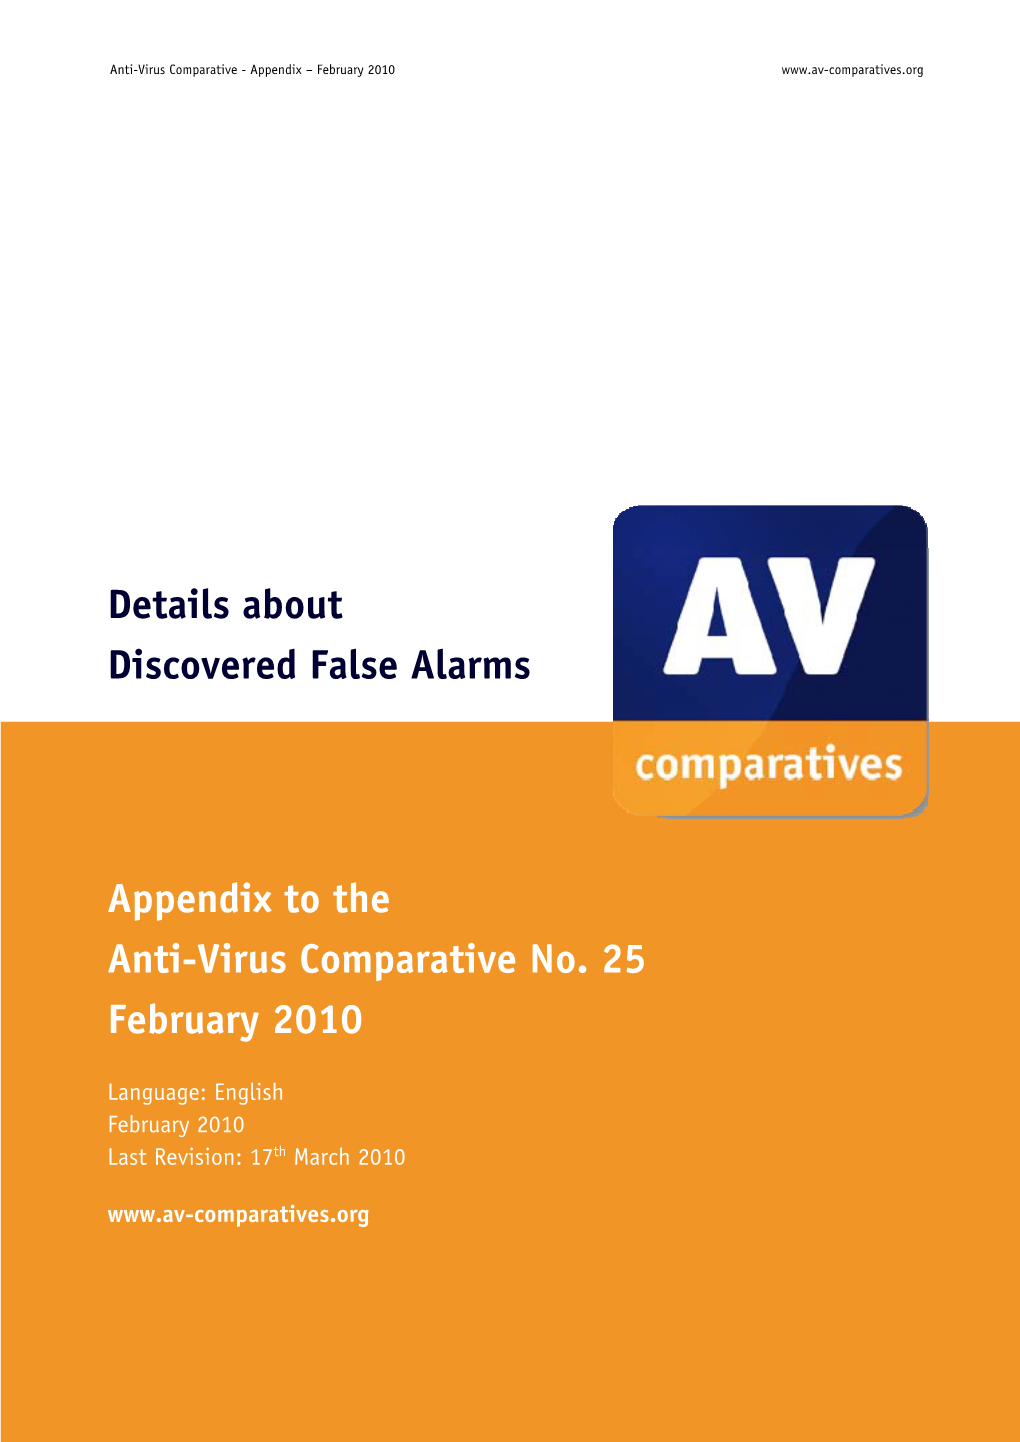 Details About the Discovered False Alarms